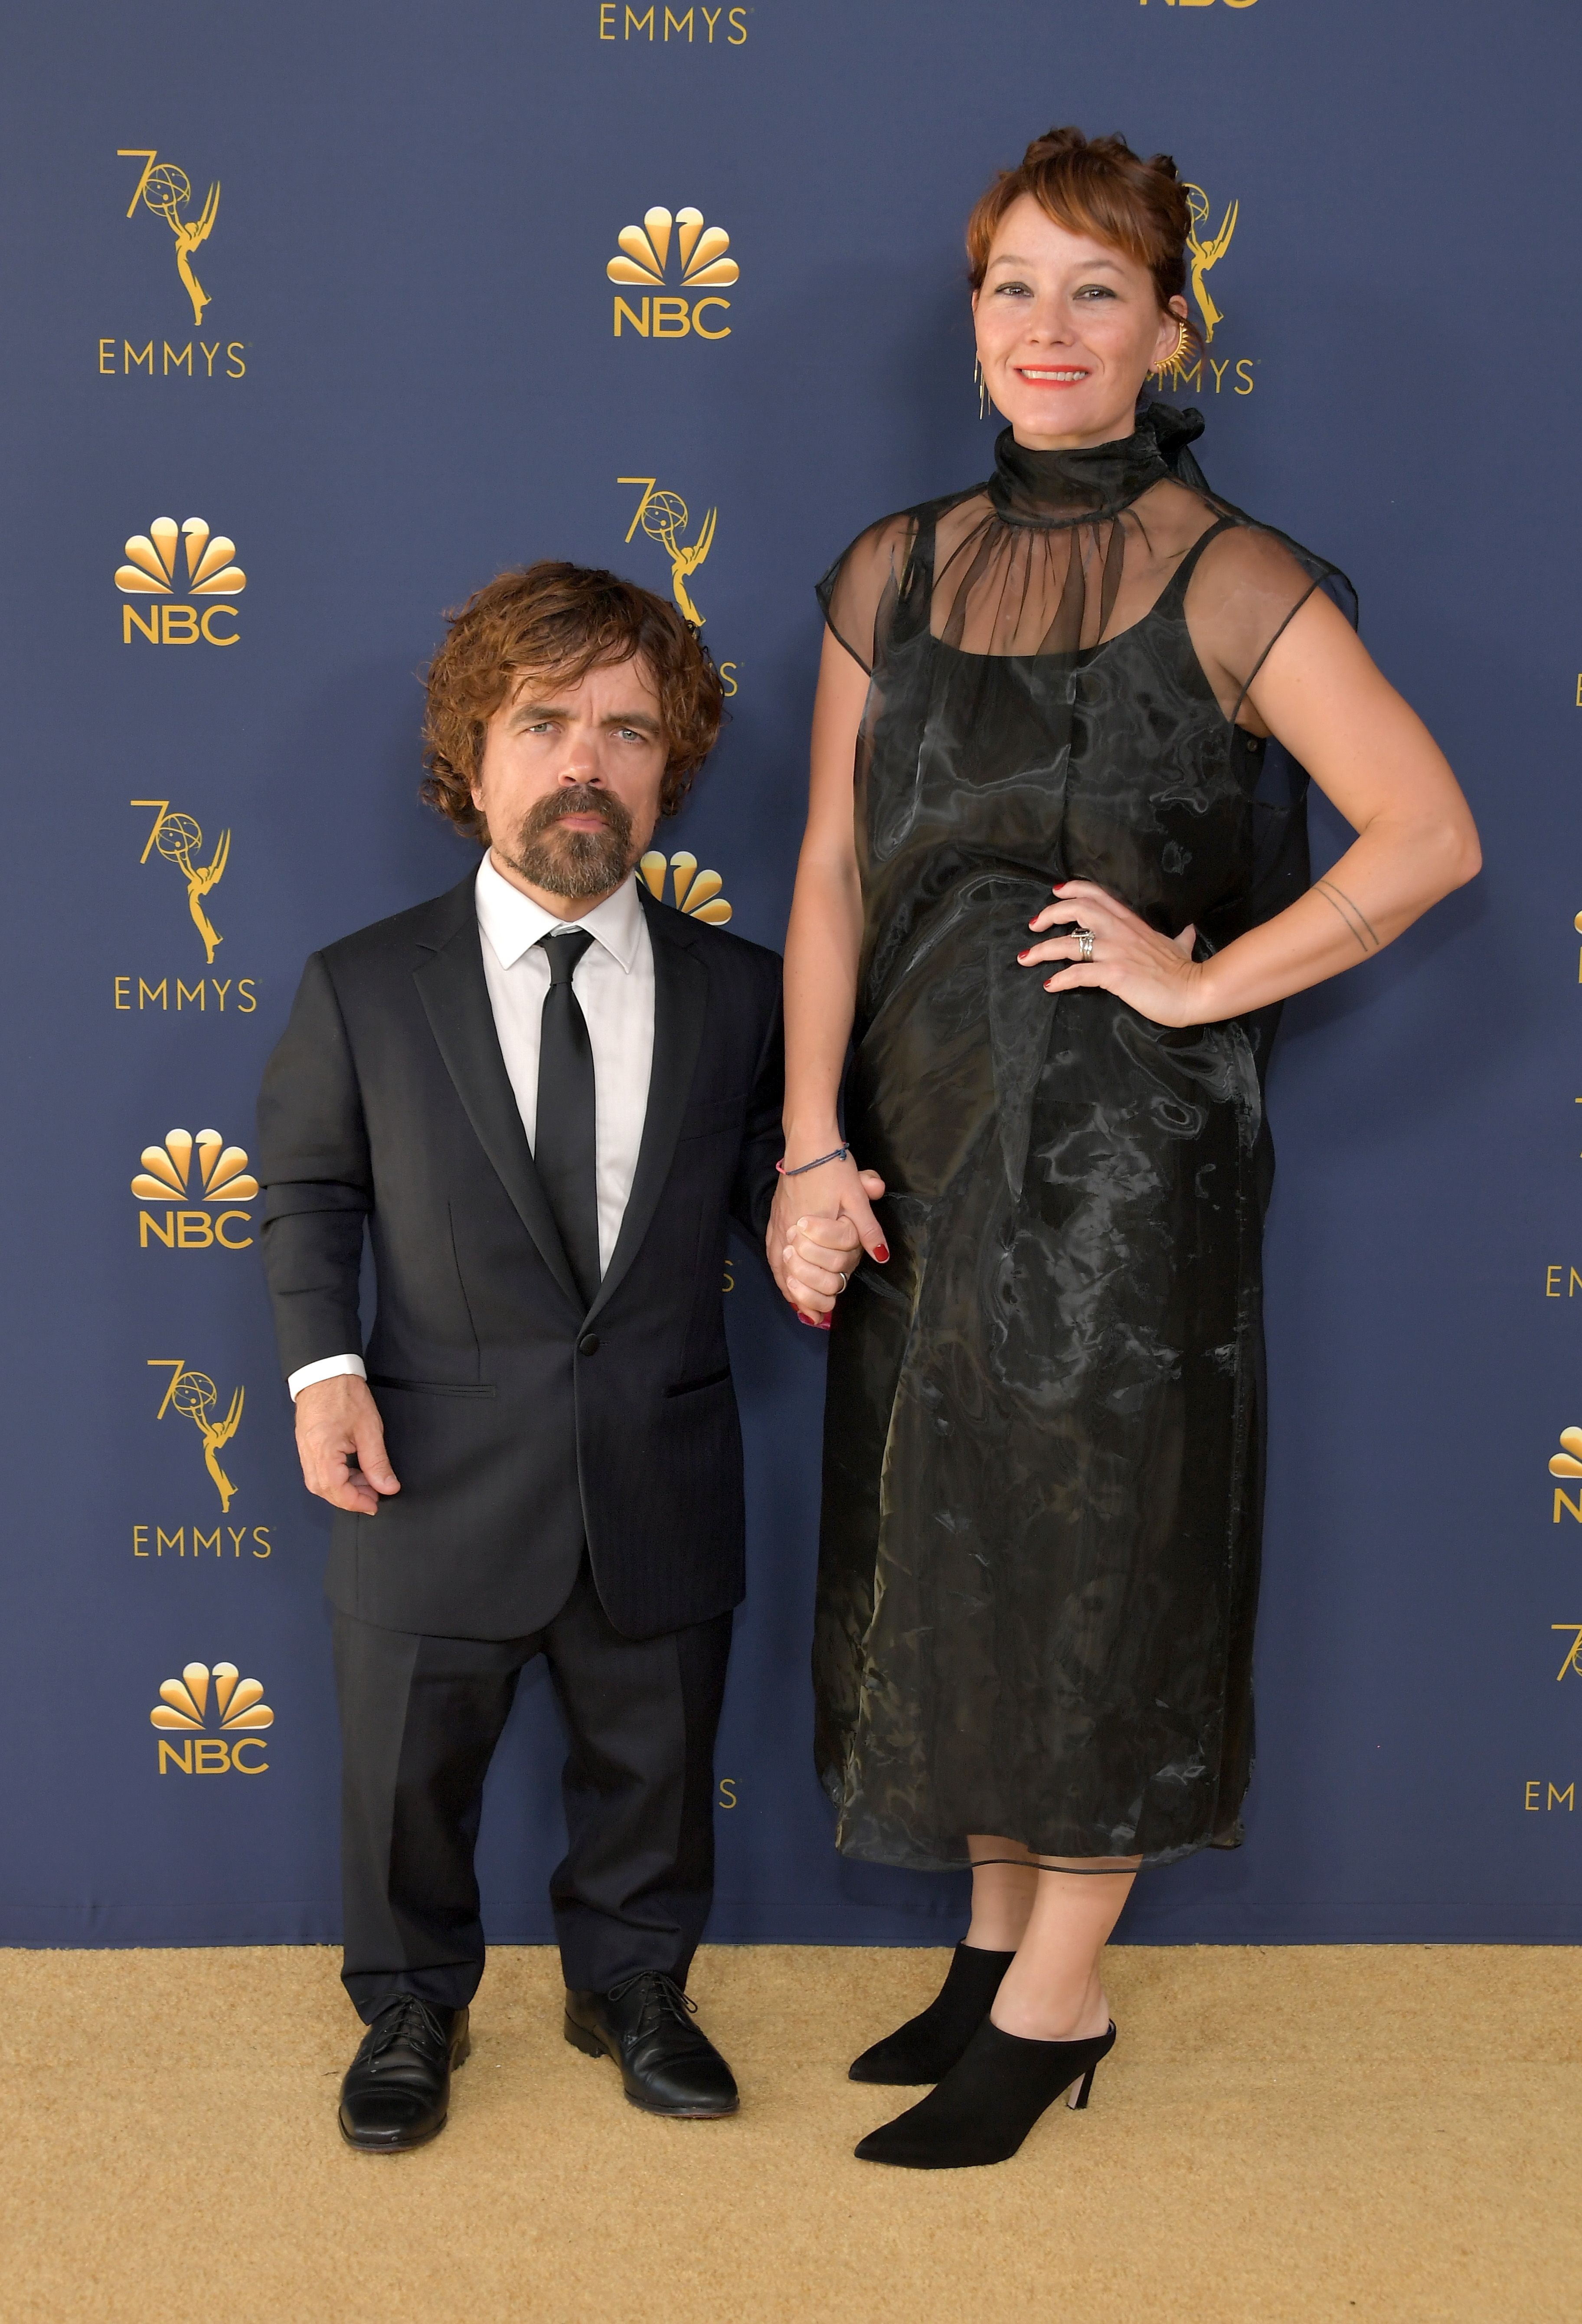 Meet the Game of Thrones stars' real-life spouses and partners